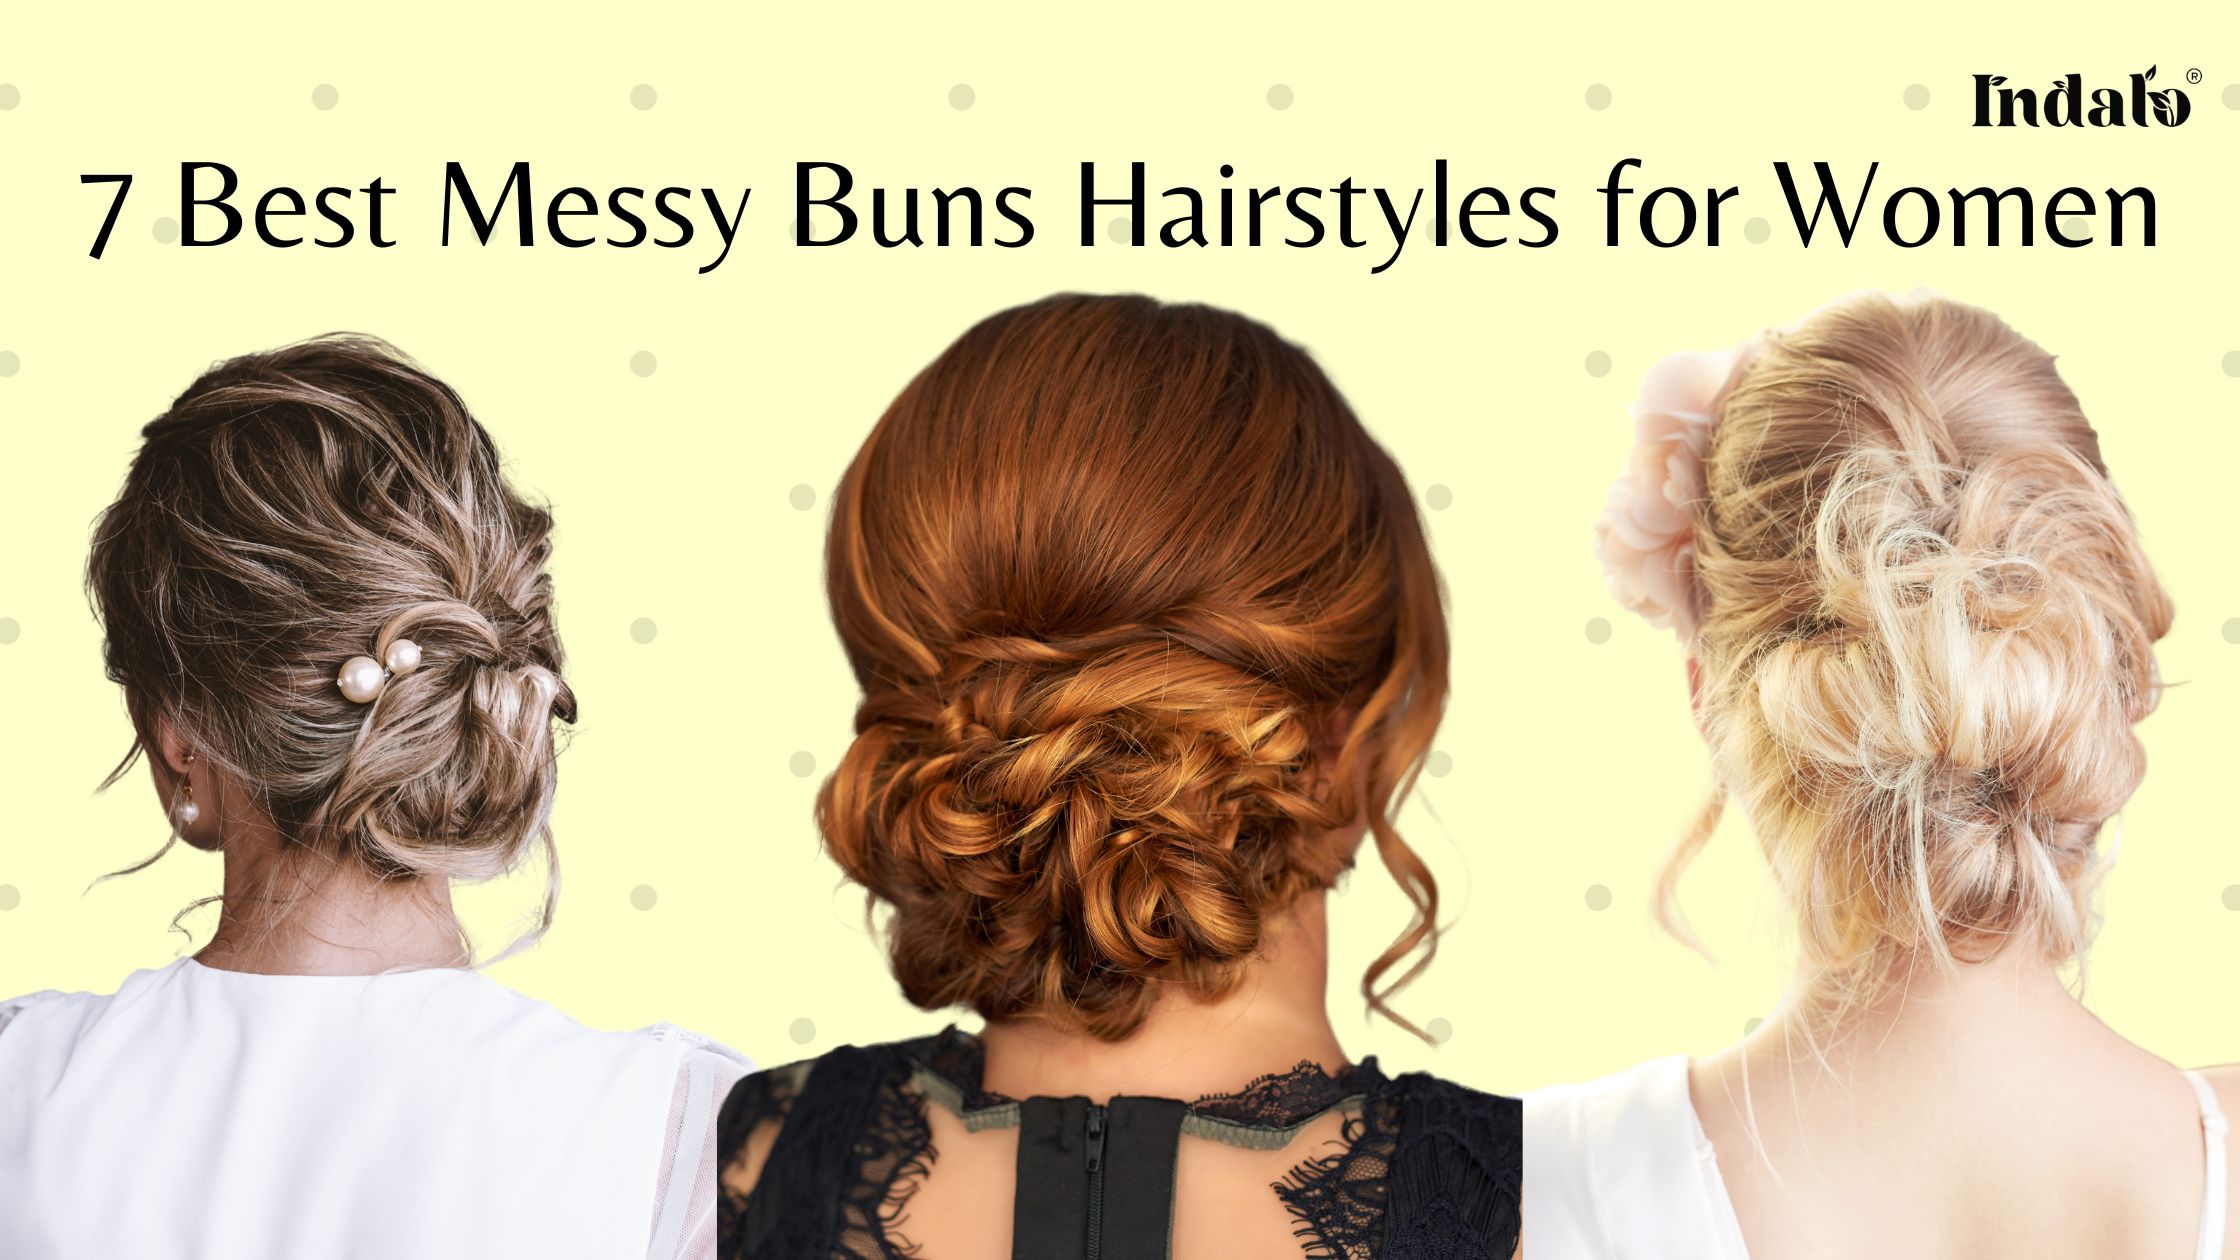 7 Best Messy Buns Hairstyles for Women